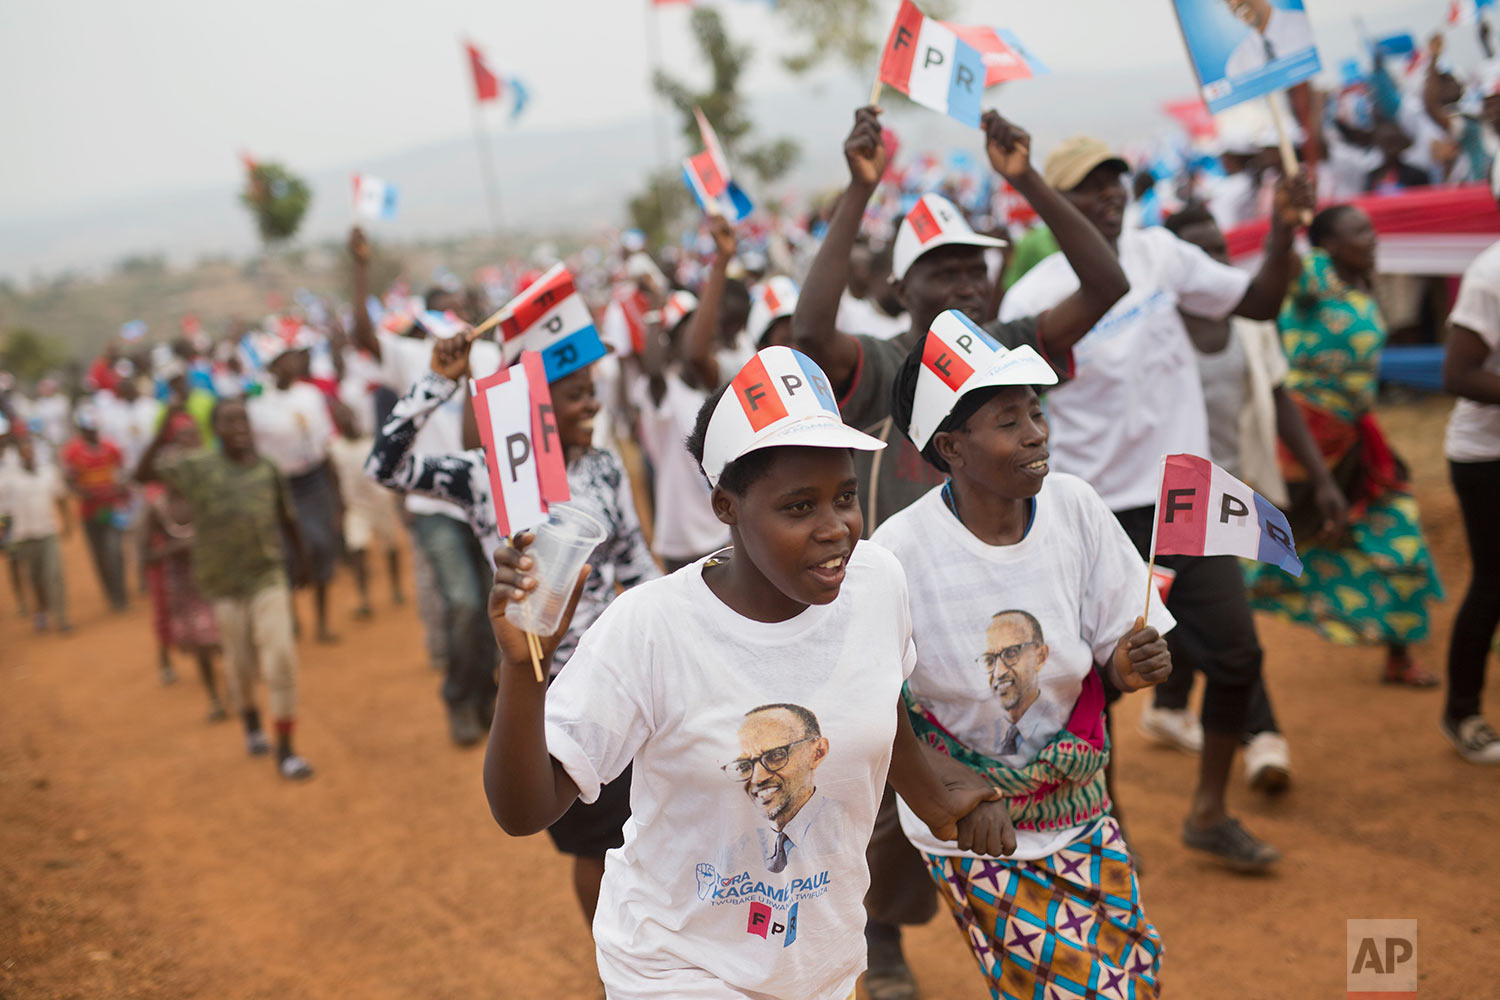  Supporters of Rwanda's President Paul Kagame, center, attend an election campaign rally on the hills overlooking Kigali, Rwanda, Wednesday Aug. 2, 2017. Rwanda's longtime president has already claimed victory in Friday's election. In this strictly r